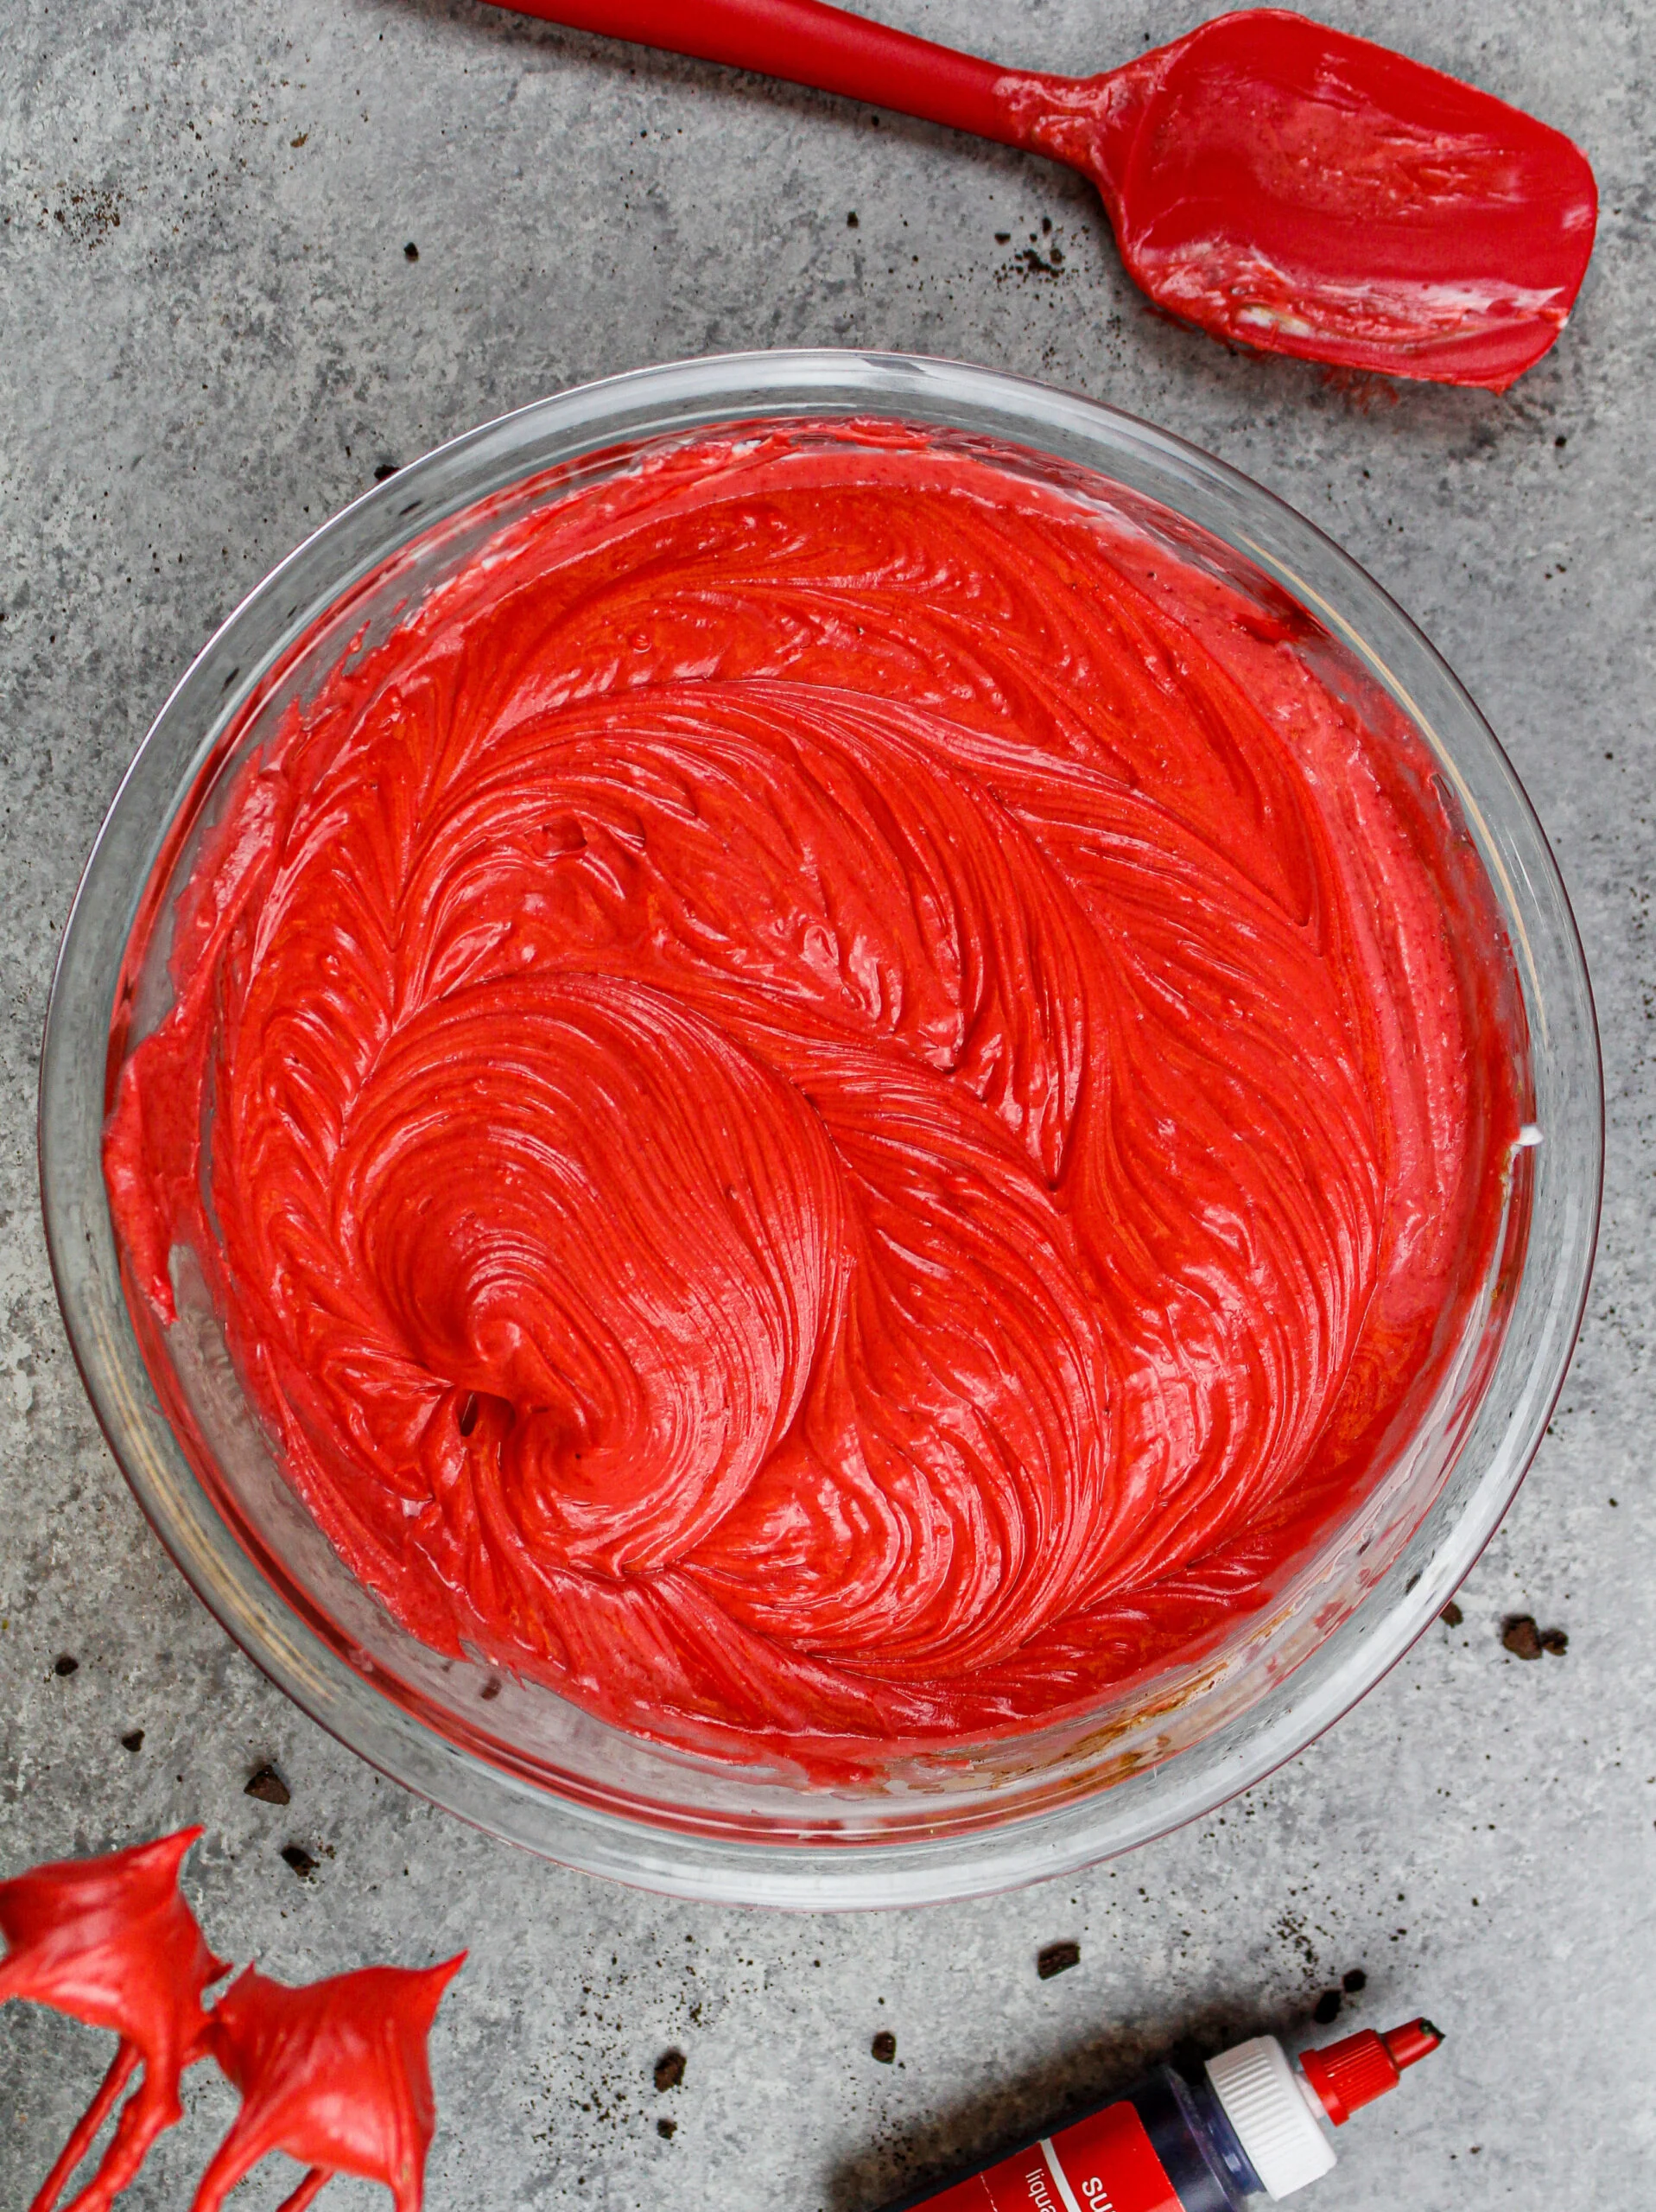 image of red velvet oreo cheesecake batter ready to be poured over its oreo crust and baked